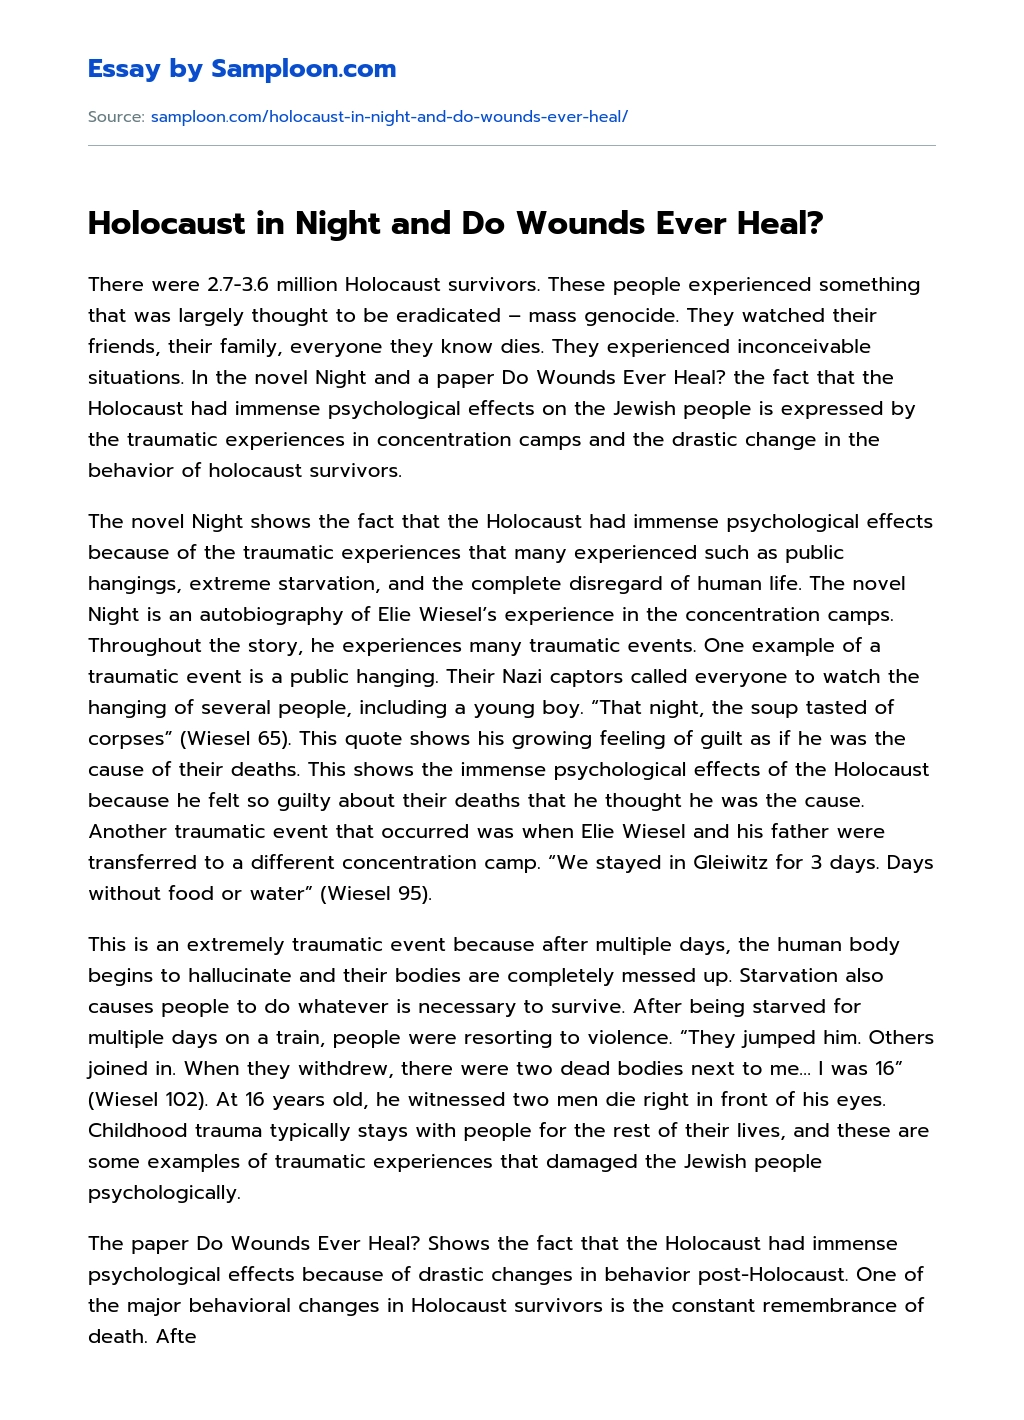 Holocaust in Night and Do Wounds Ever Heal? essay